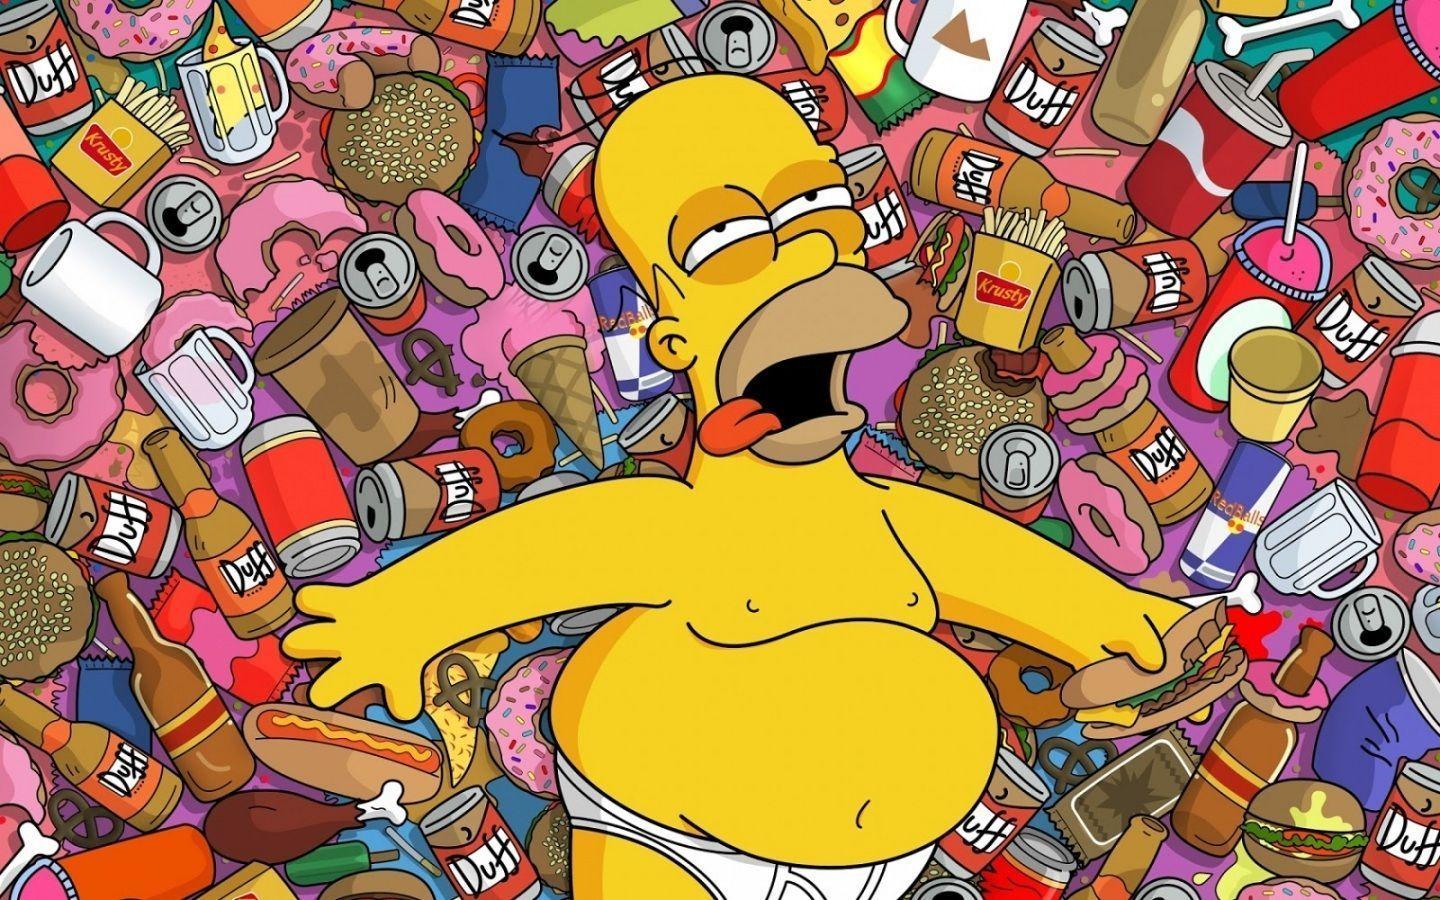 Drawn Heroes. The Simpsons Wallpaper